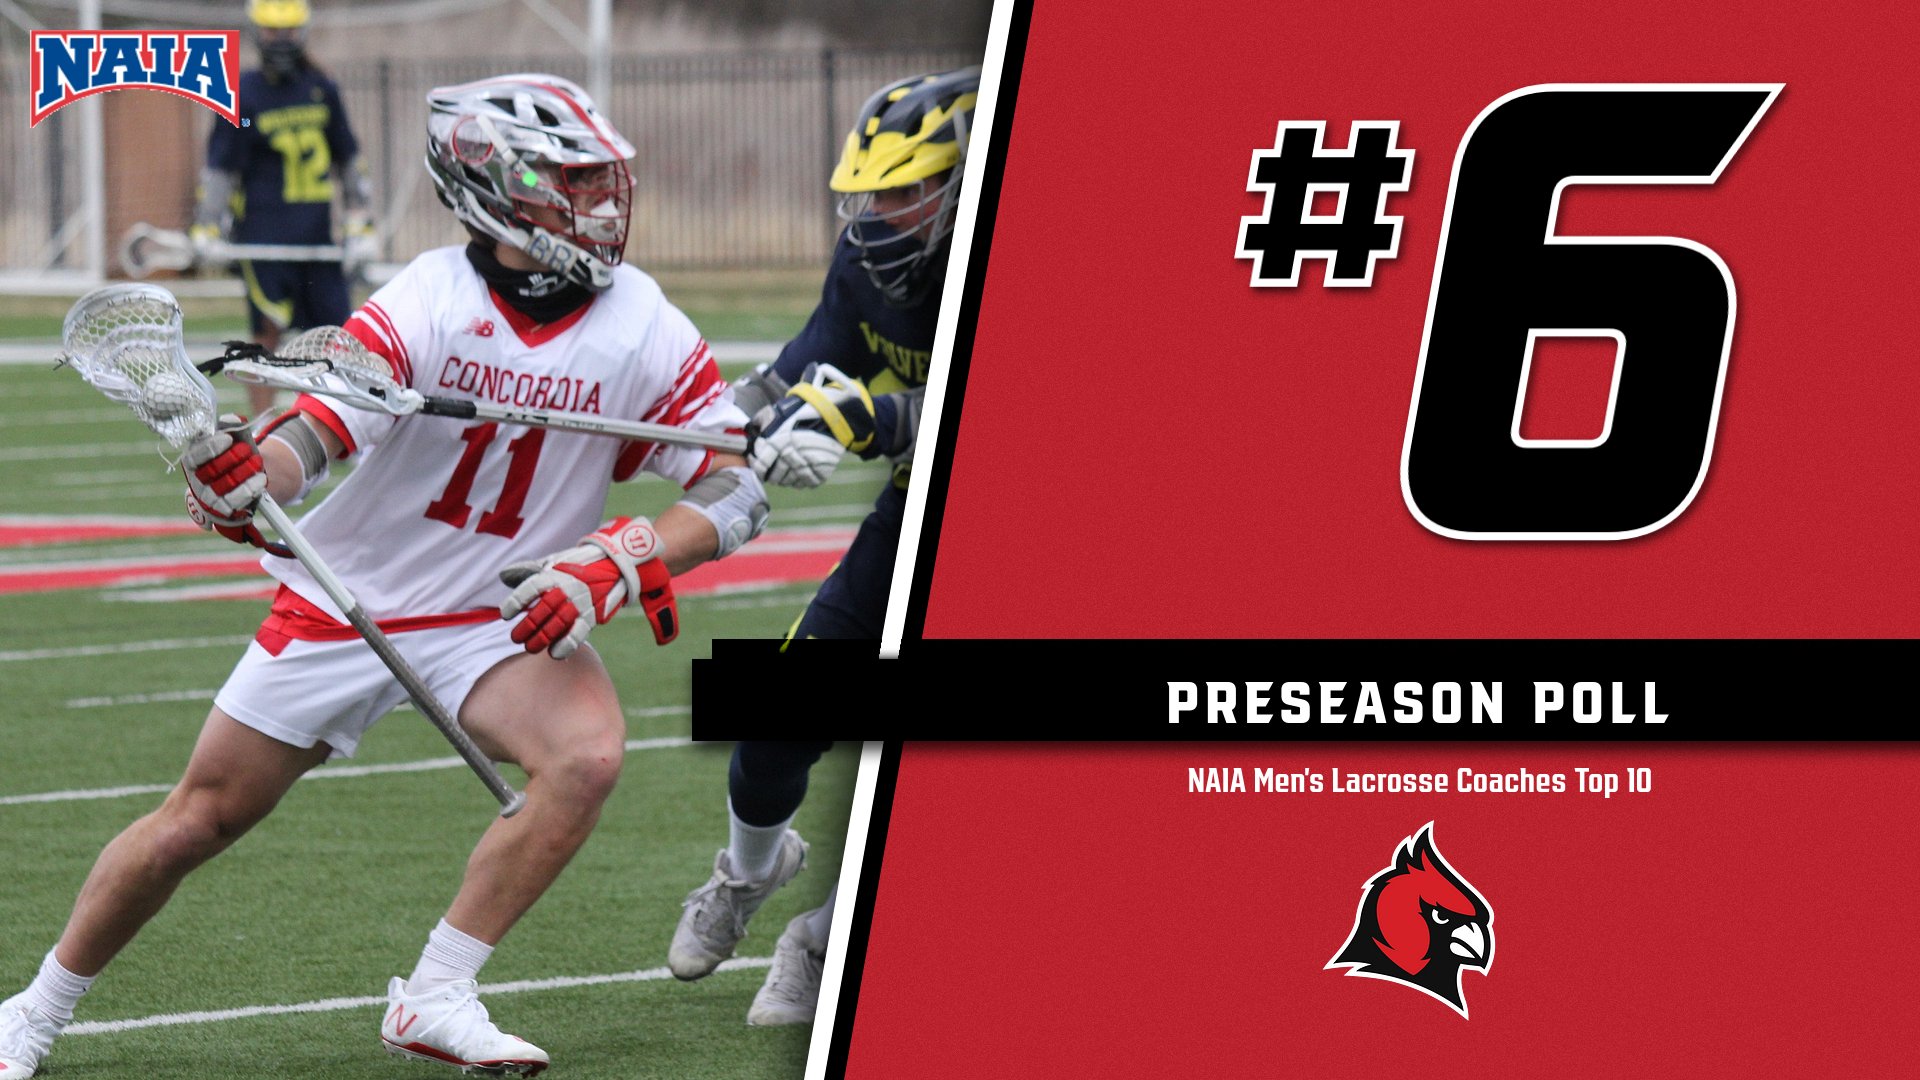 Men's Lacrosse ranked 6th in initial NAIA Top 10 poll